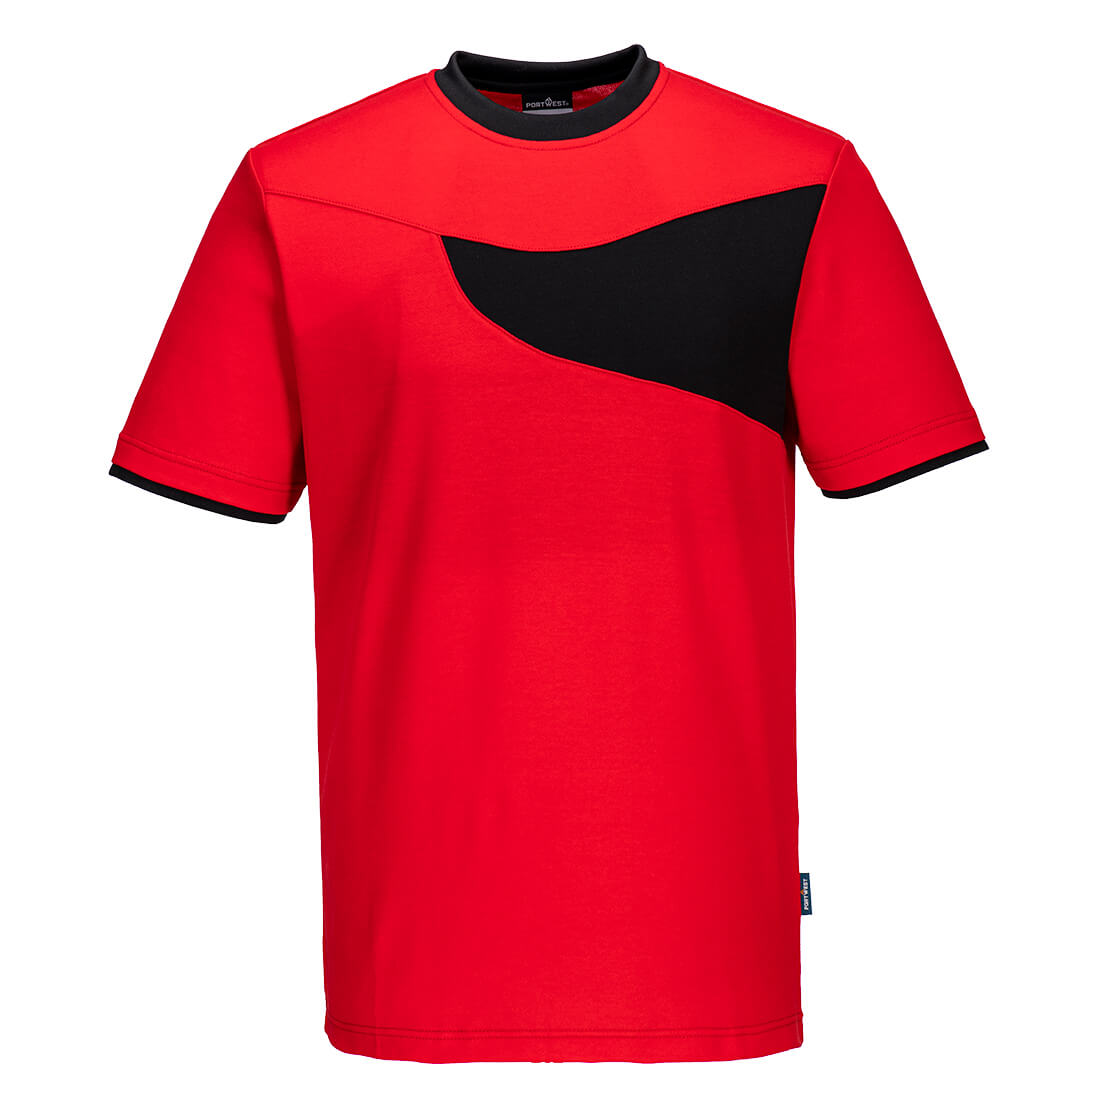 PW2 T-Shirt S/S - Red/Black